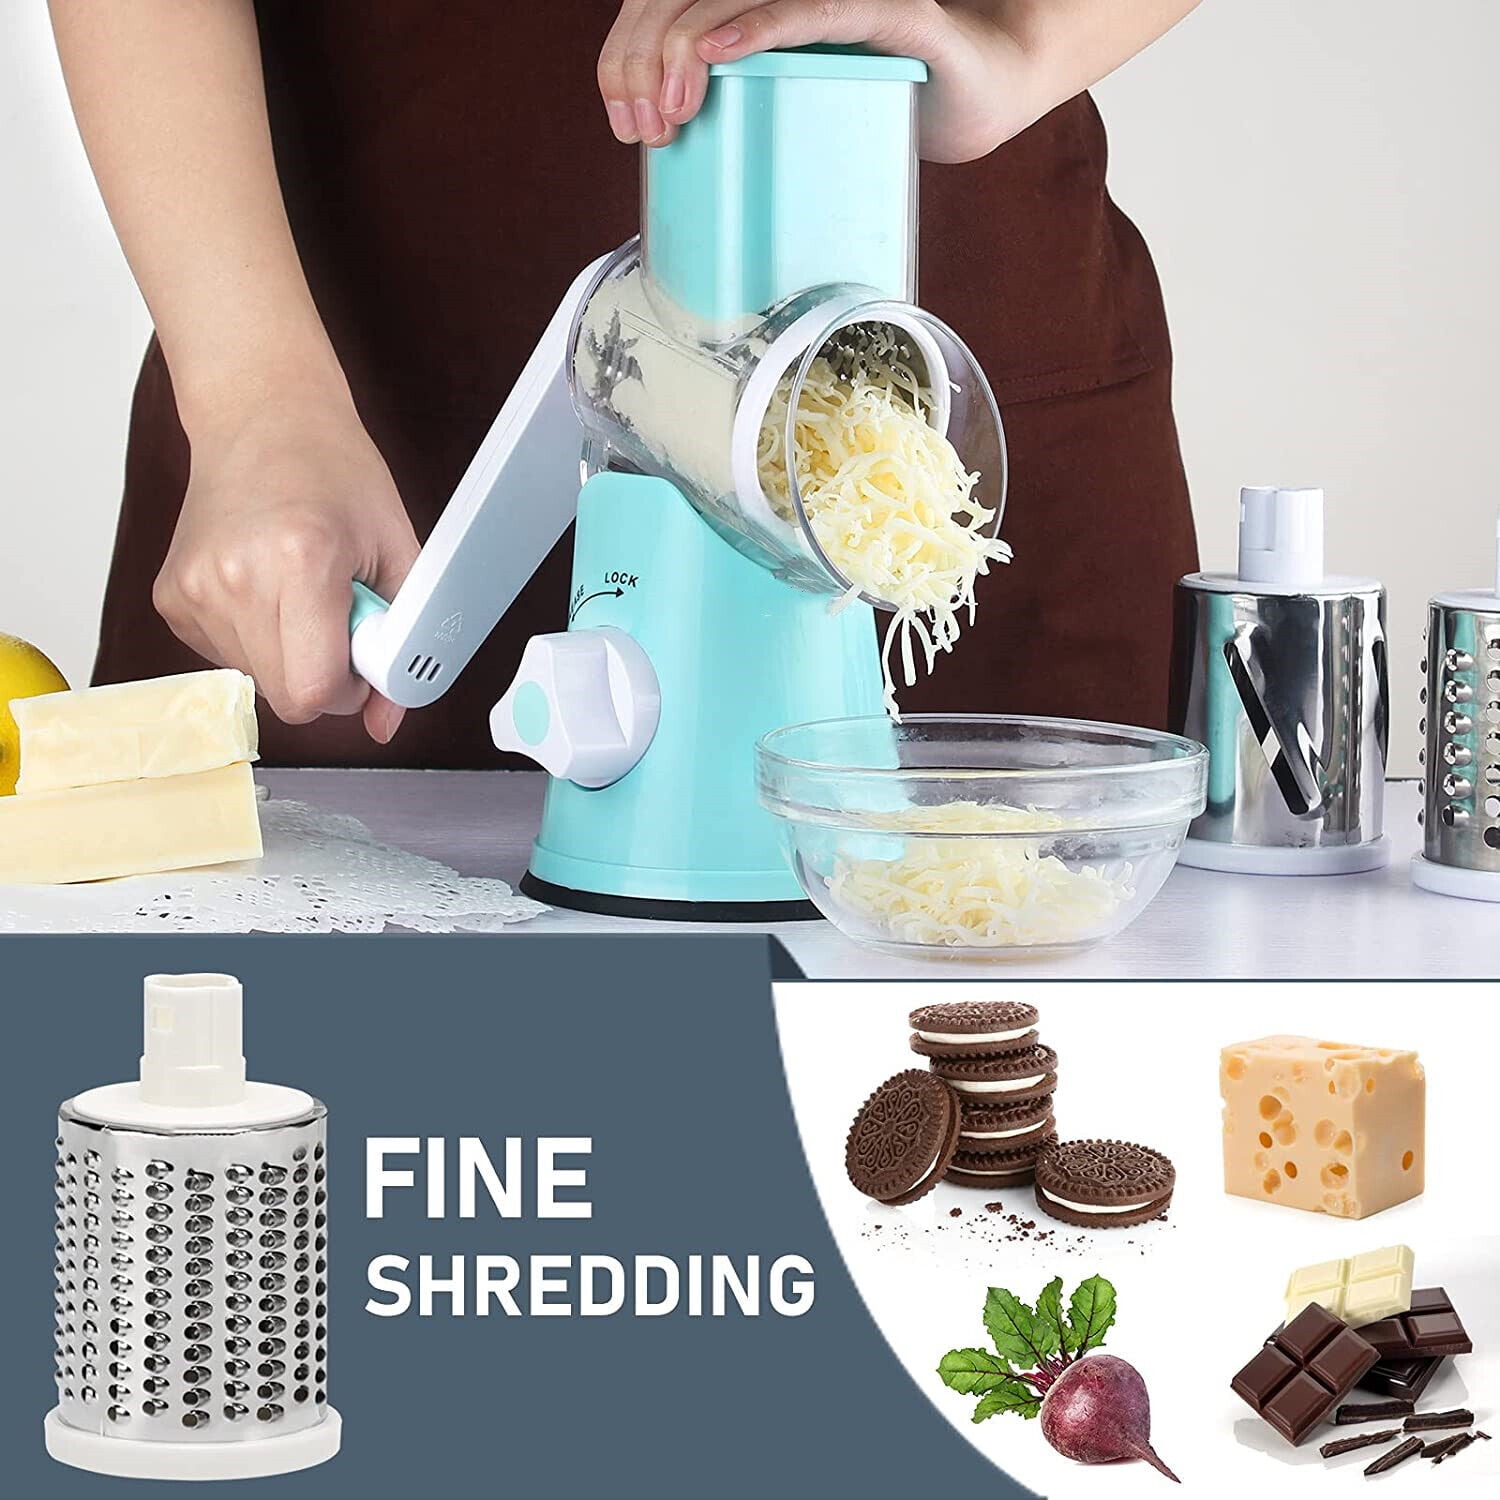  Rotary Cheese Grater Shredder Chopper Round Tumbling Box  Mandoline Slicer Nut Grinder for Vegetable, Hash Brown, Potato with 3 Sharp  Drums Blades and Strong Suction Base by Valuetool: Home & Kitchen